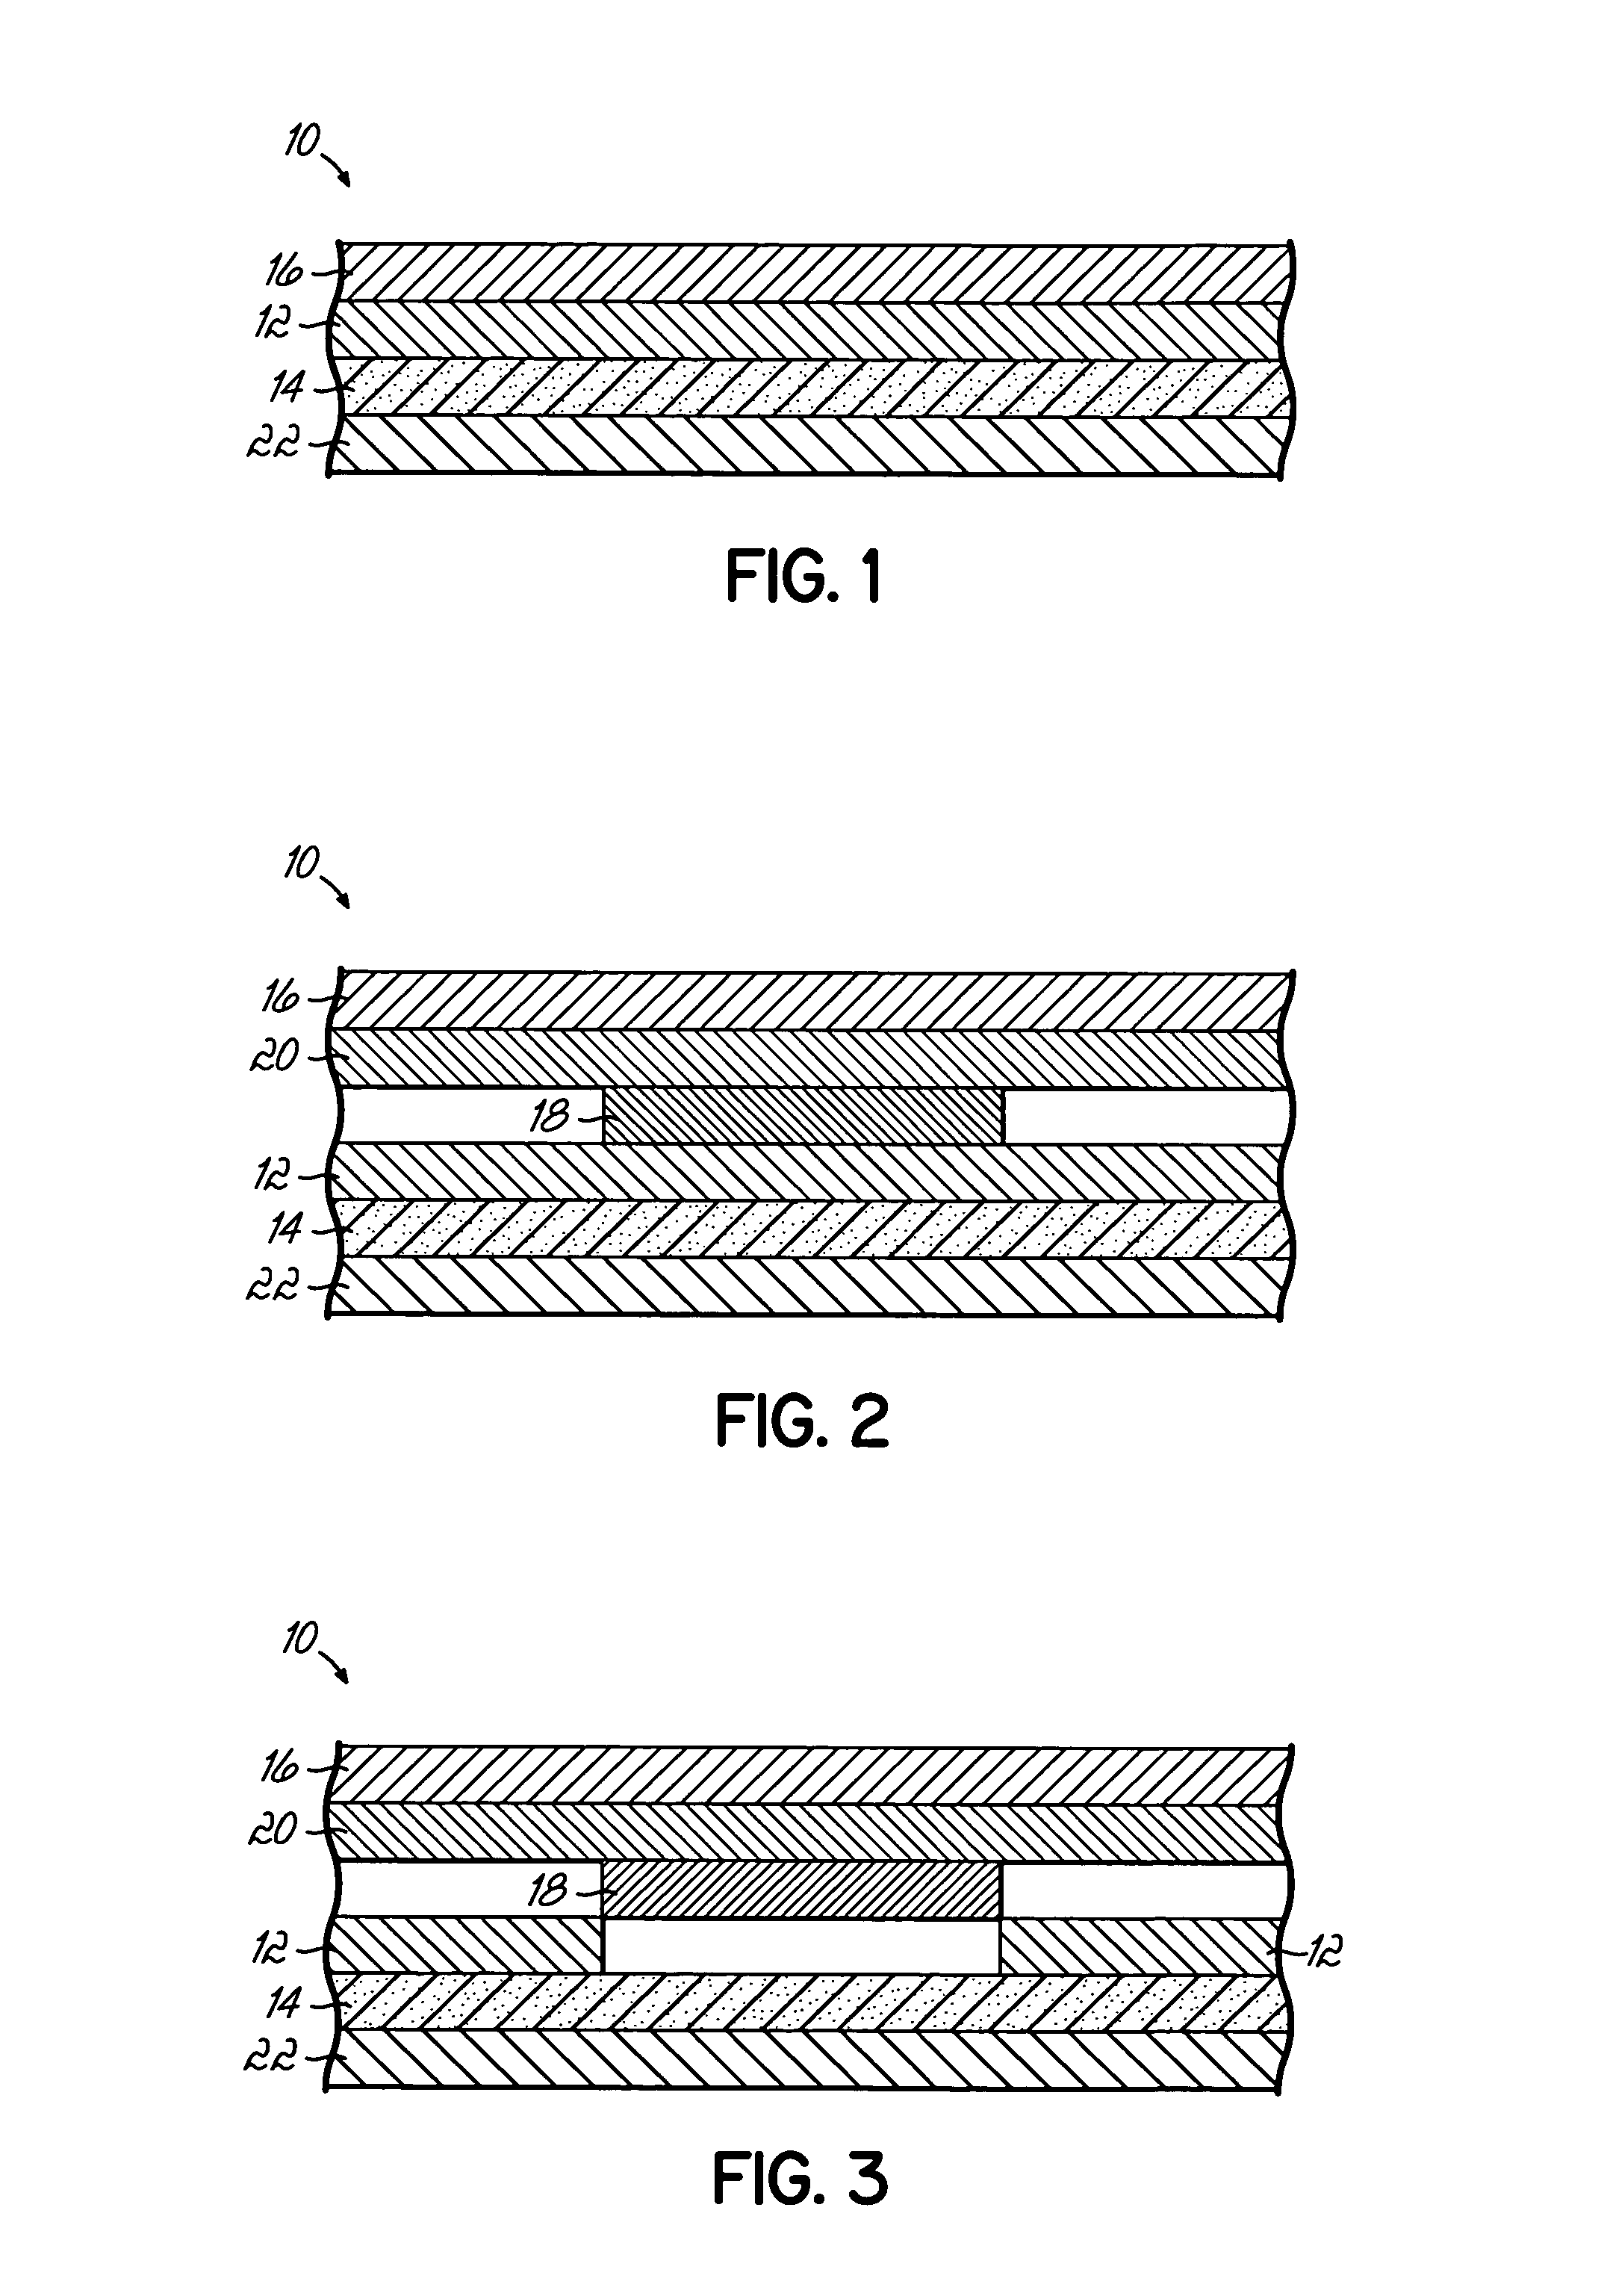 Laminate with a heat-activatable expandable layer